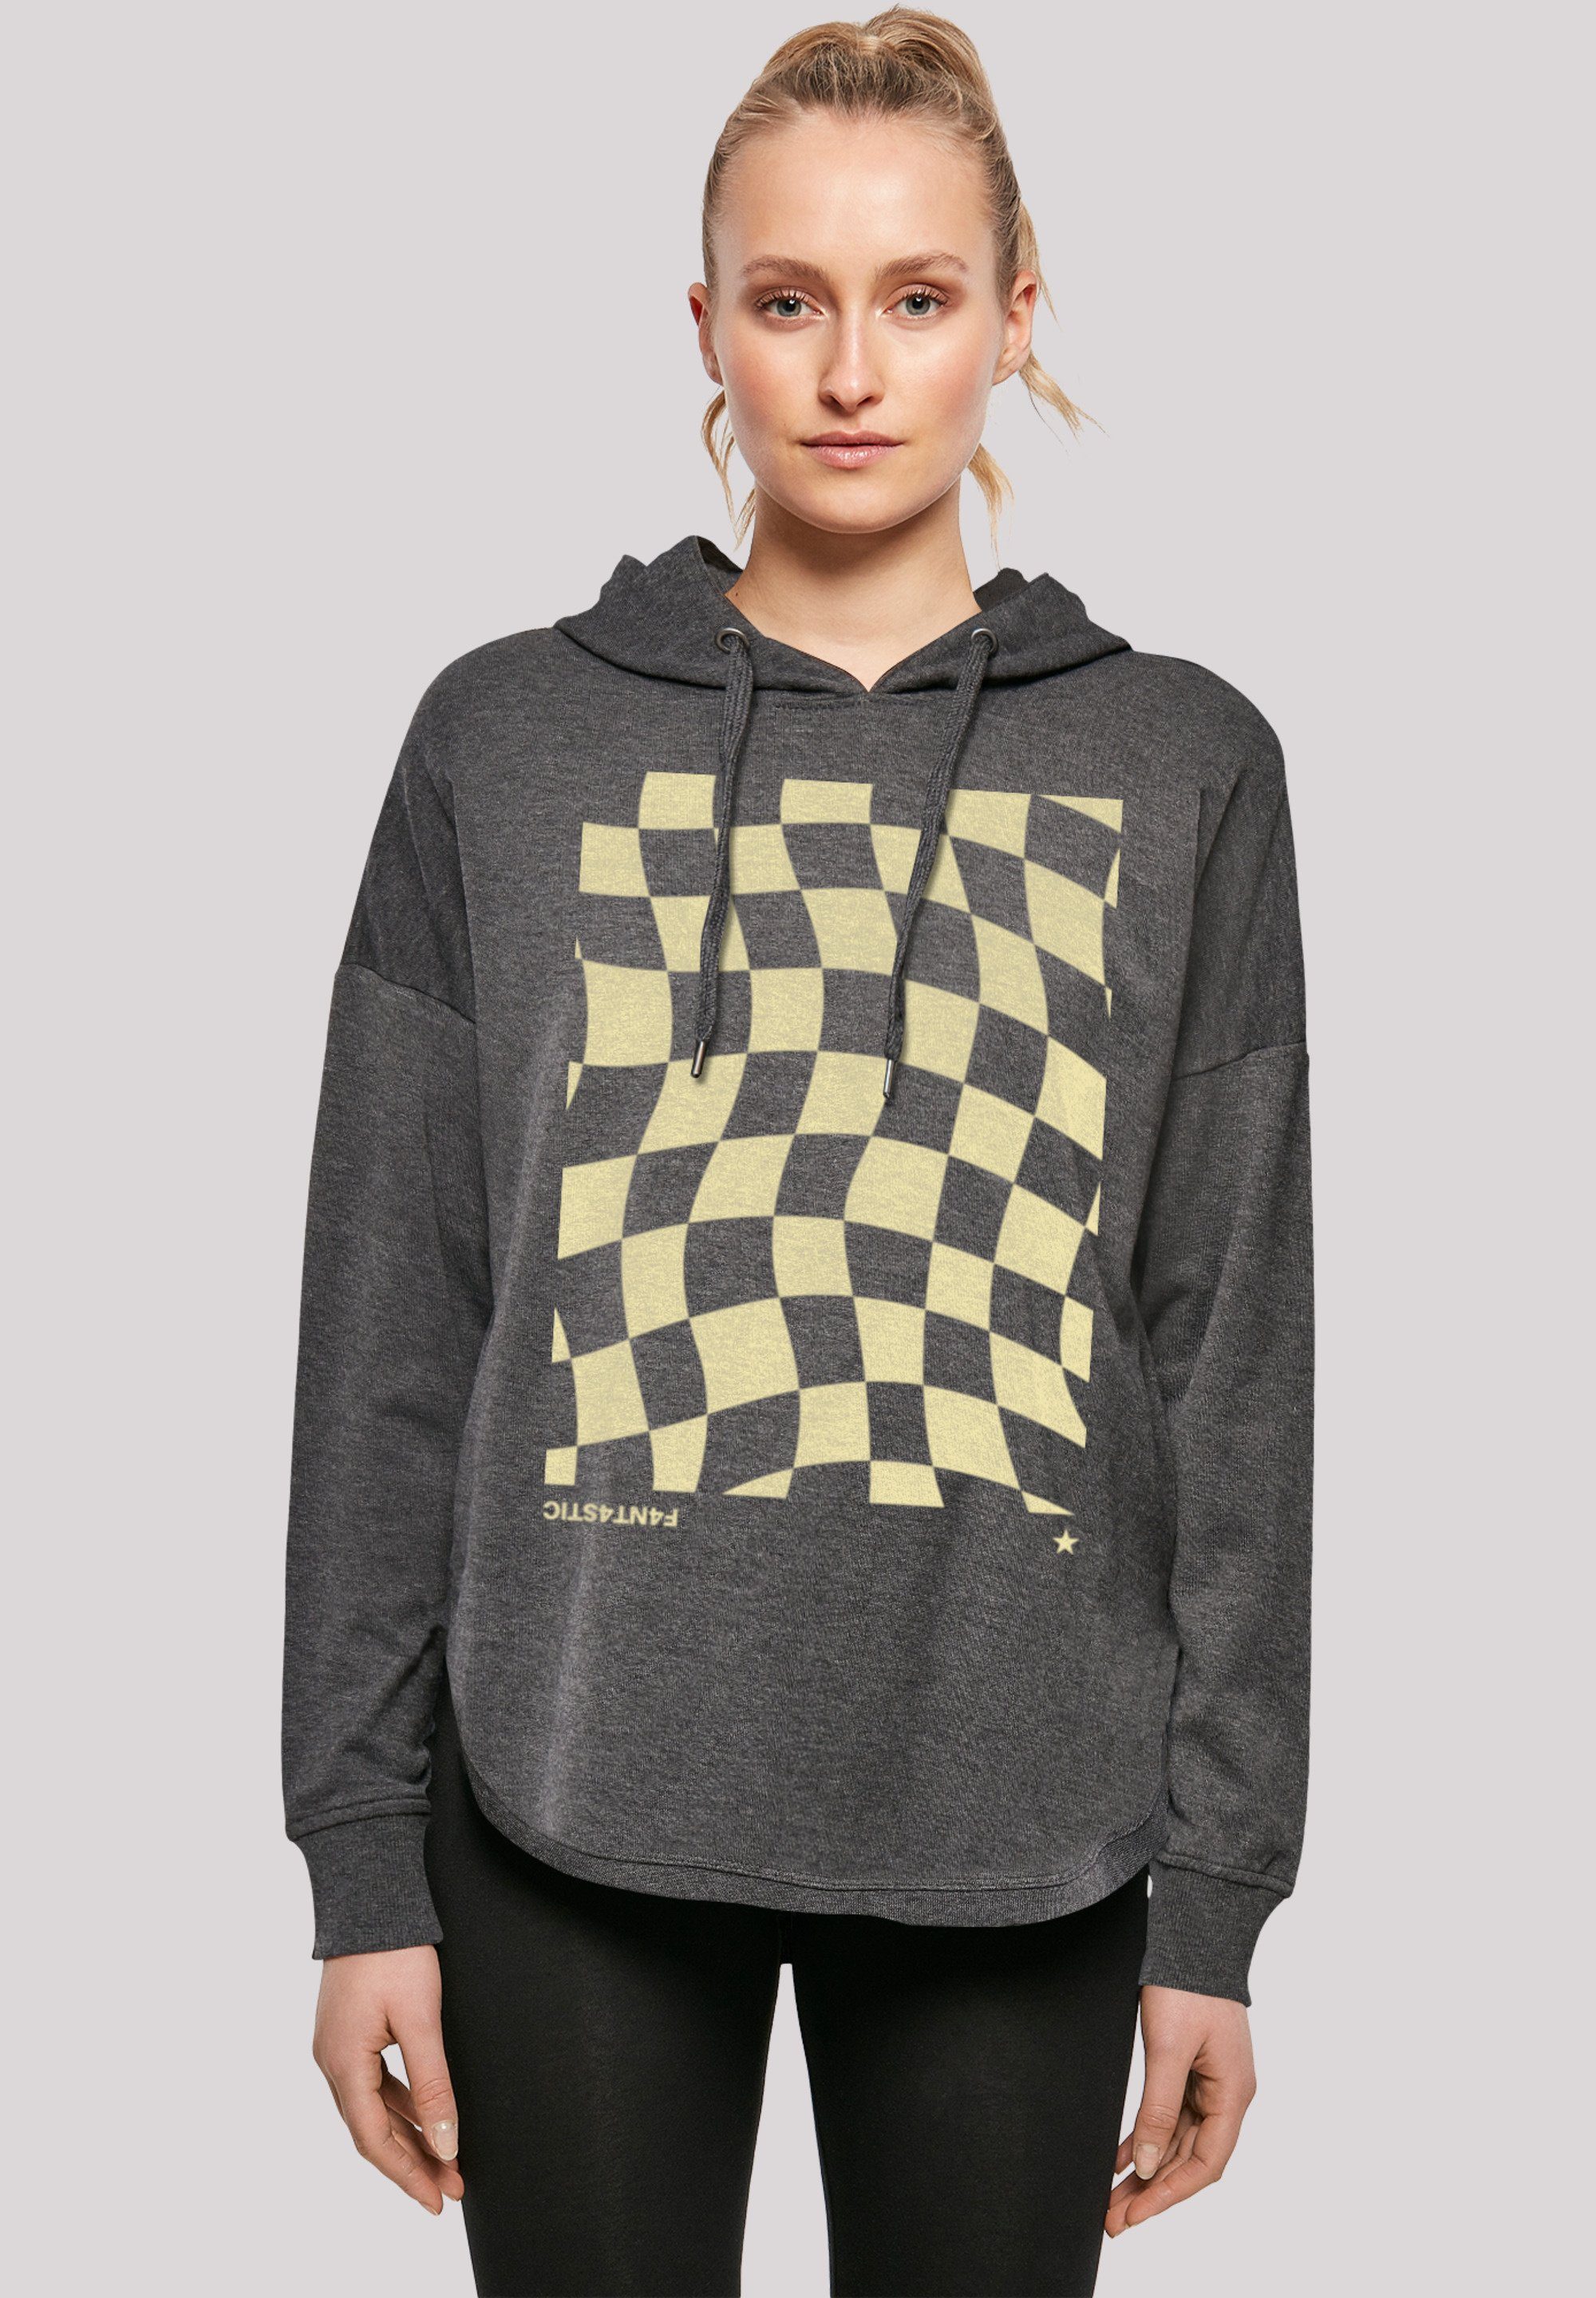 F4NT4STIC Kapuzenpullover Wavy Schach Muster Print charcoal